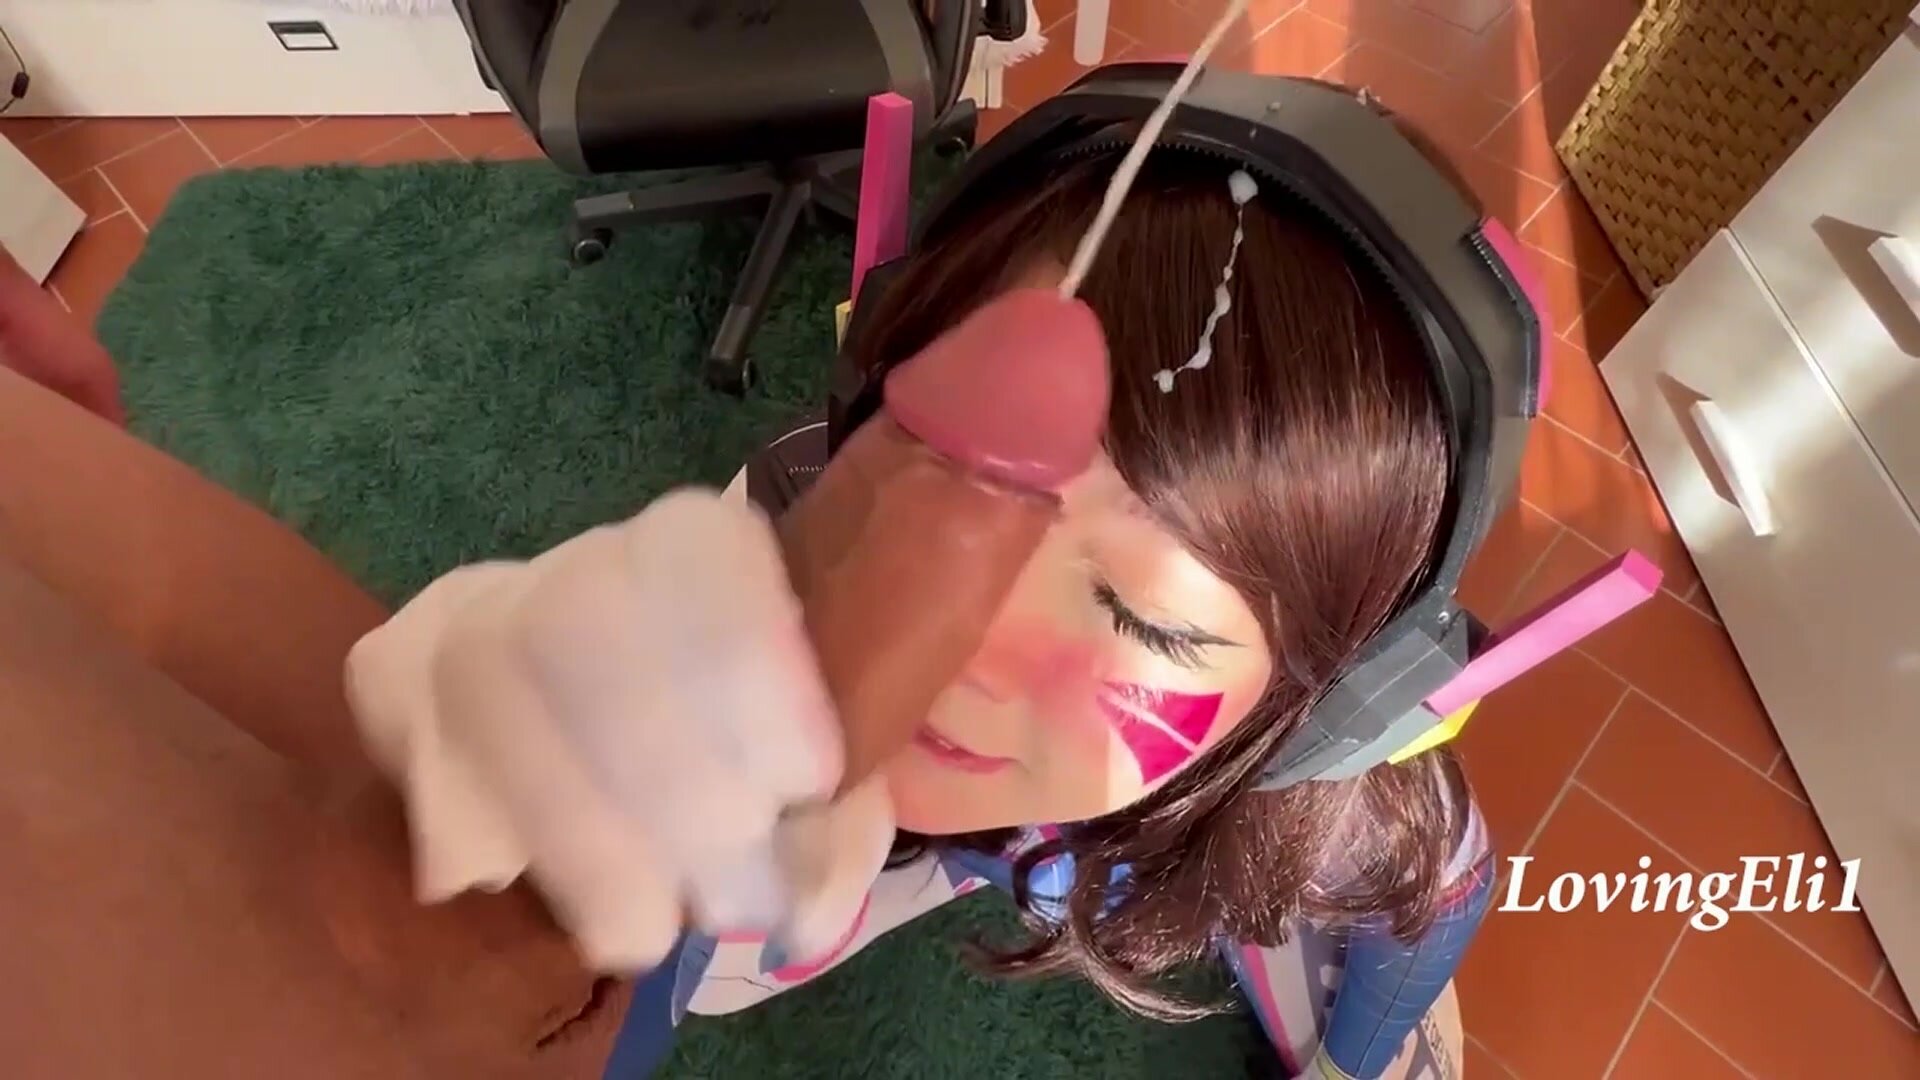 DVA cosplay cumshots on mi face and hair